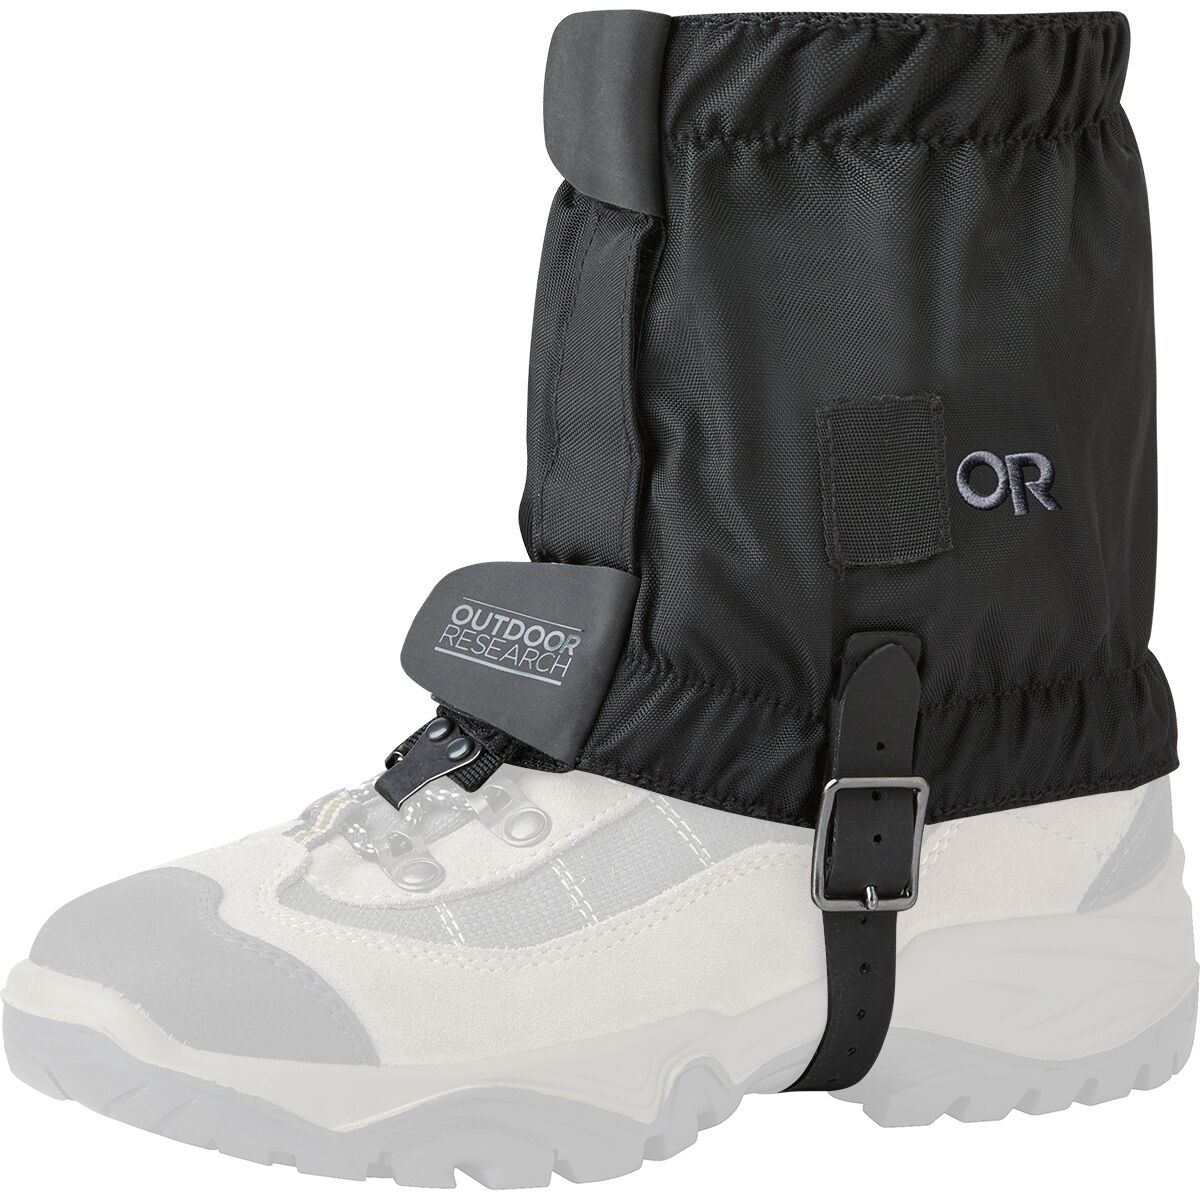 Outdoor Research Rocky Mountain Low Gaiter - Kids'